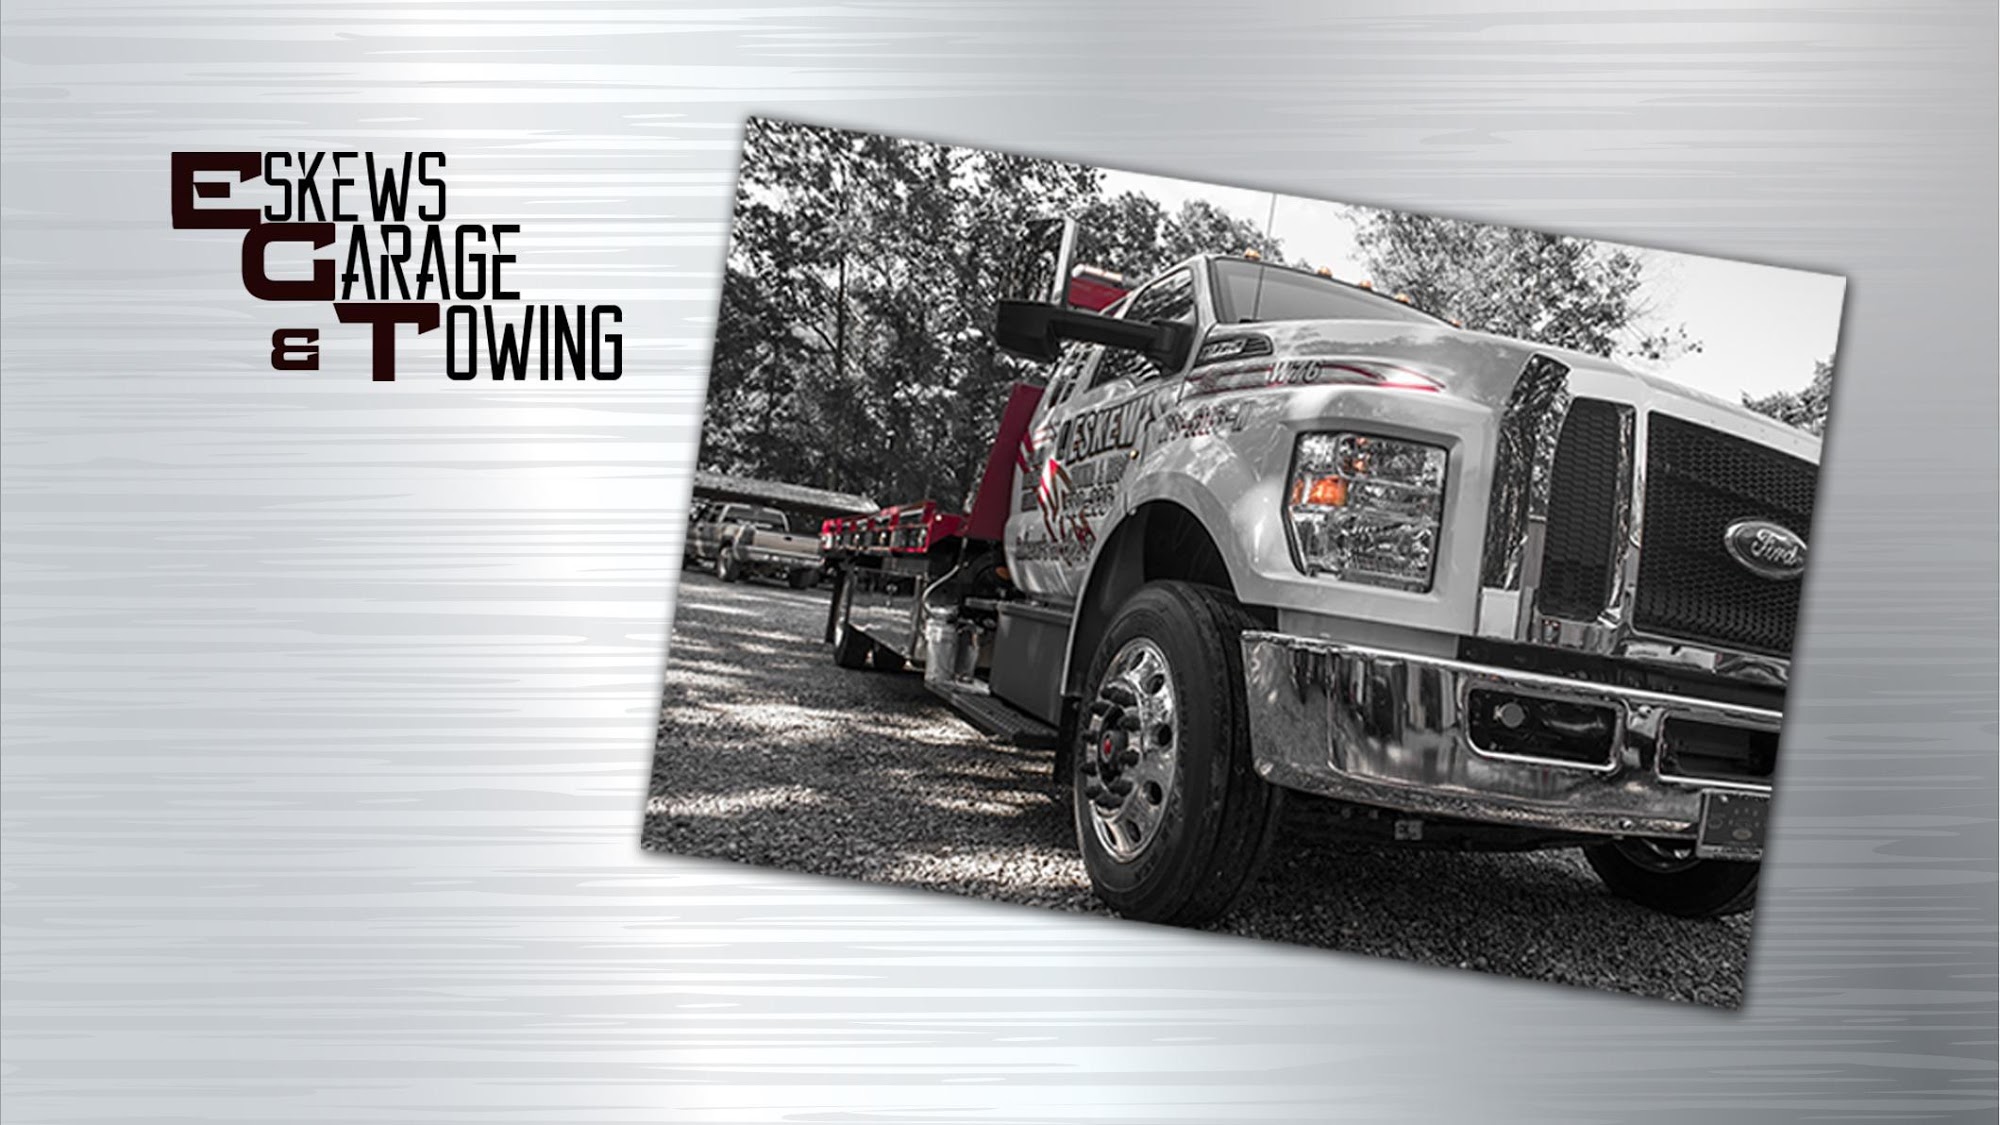 Eskew's Garage and Towing